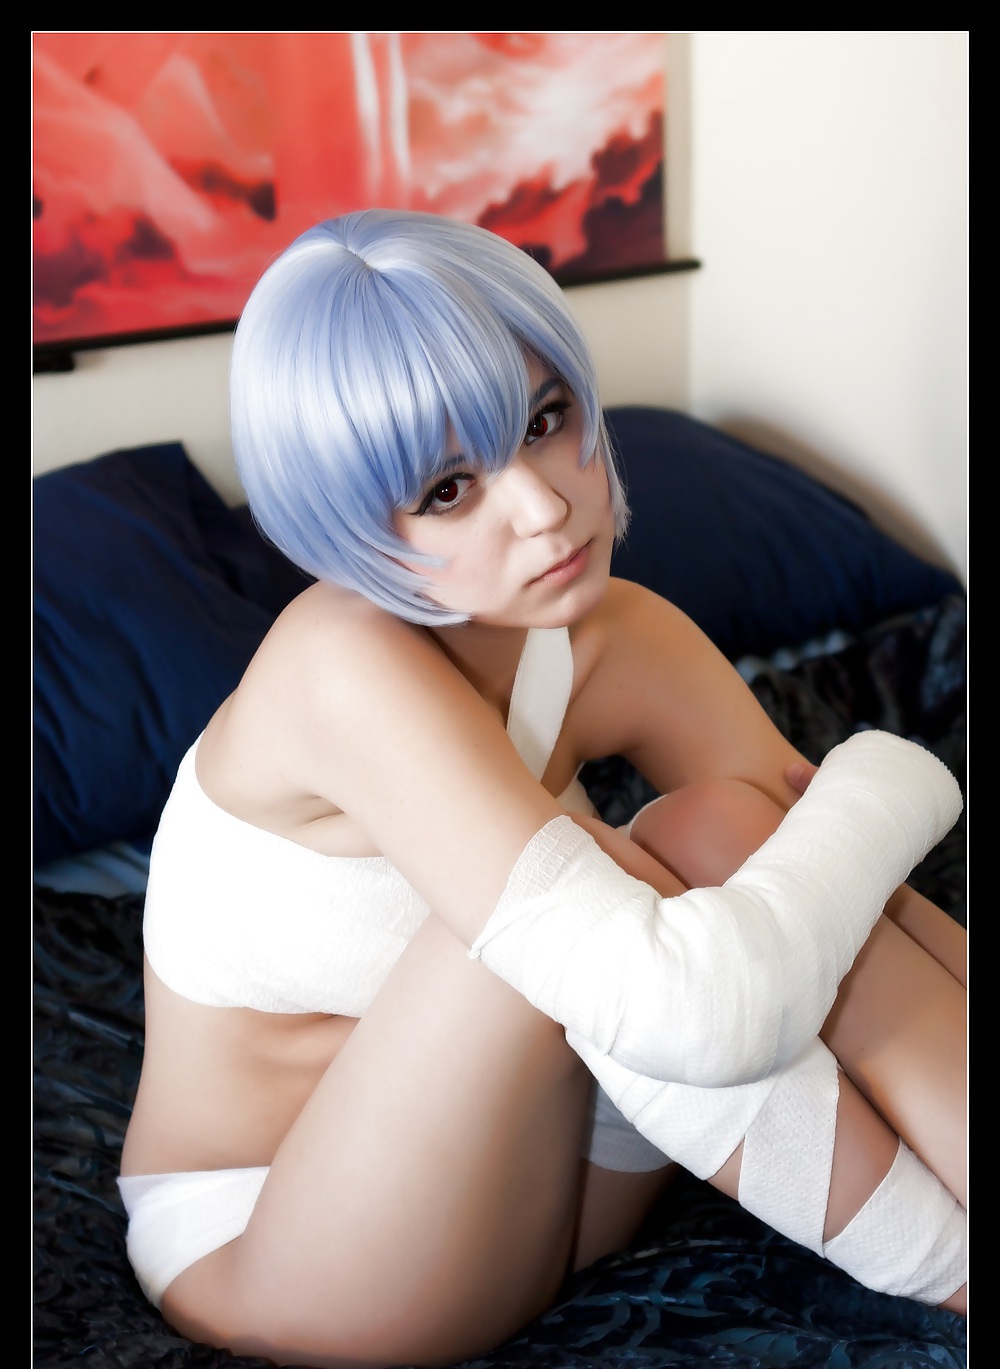 Sex Cosplay Beautiful Busty Whore image